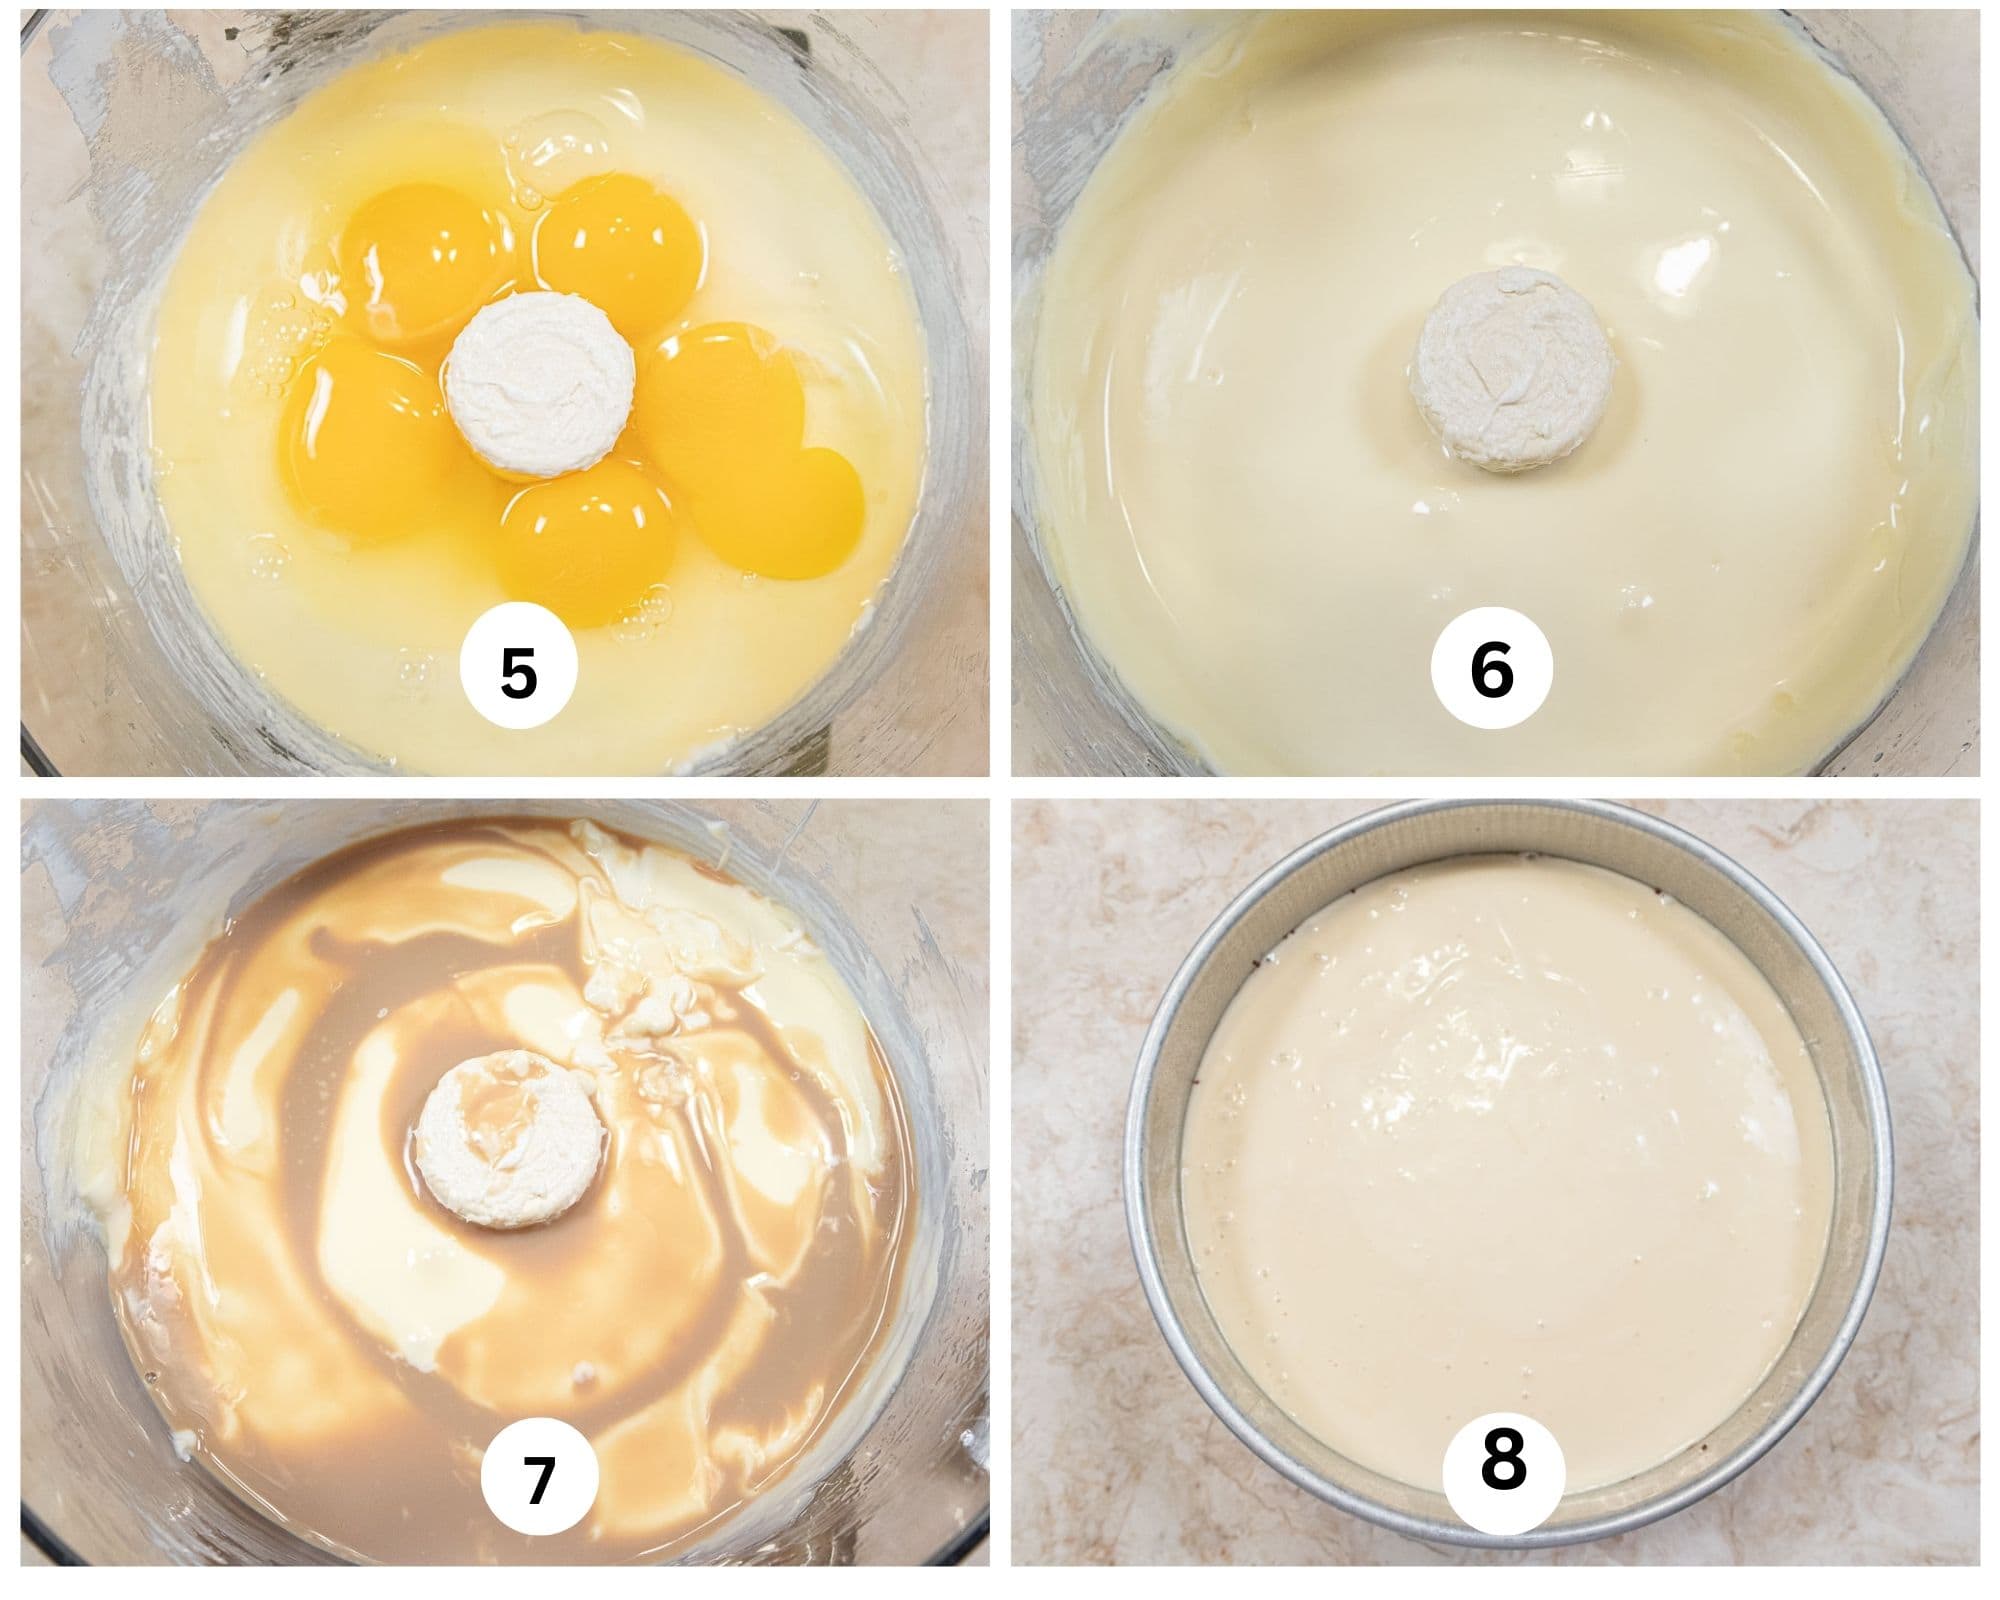 This collage shows the eggs being added to the processor, then processed after which the bailey's is added and the mixed cheesecake filling in the pan.